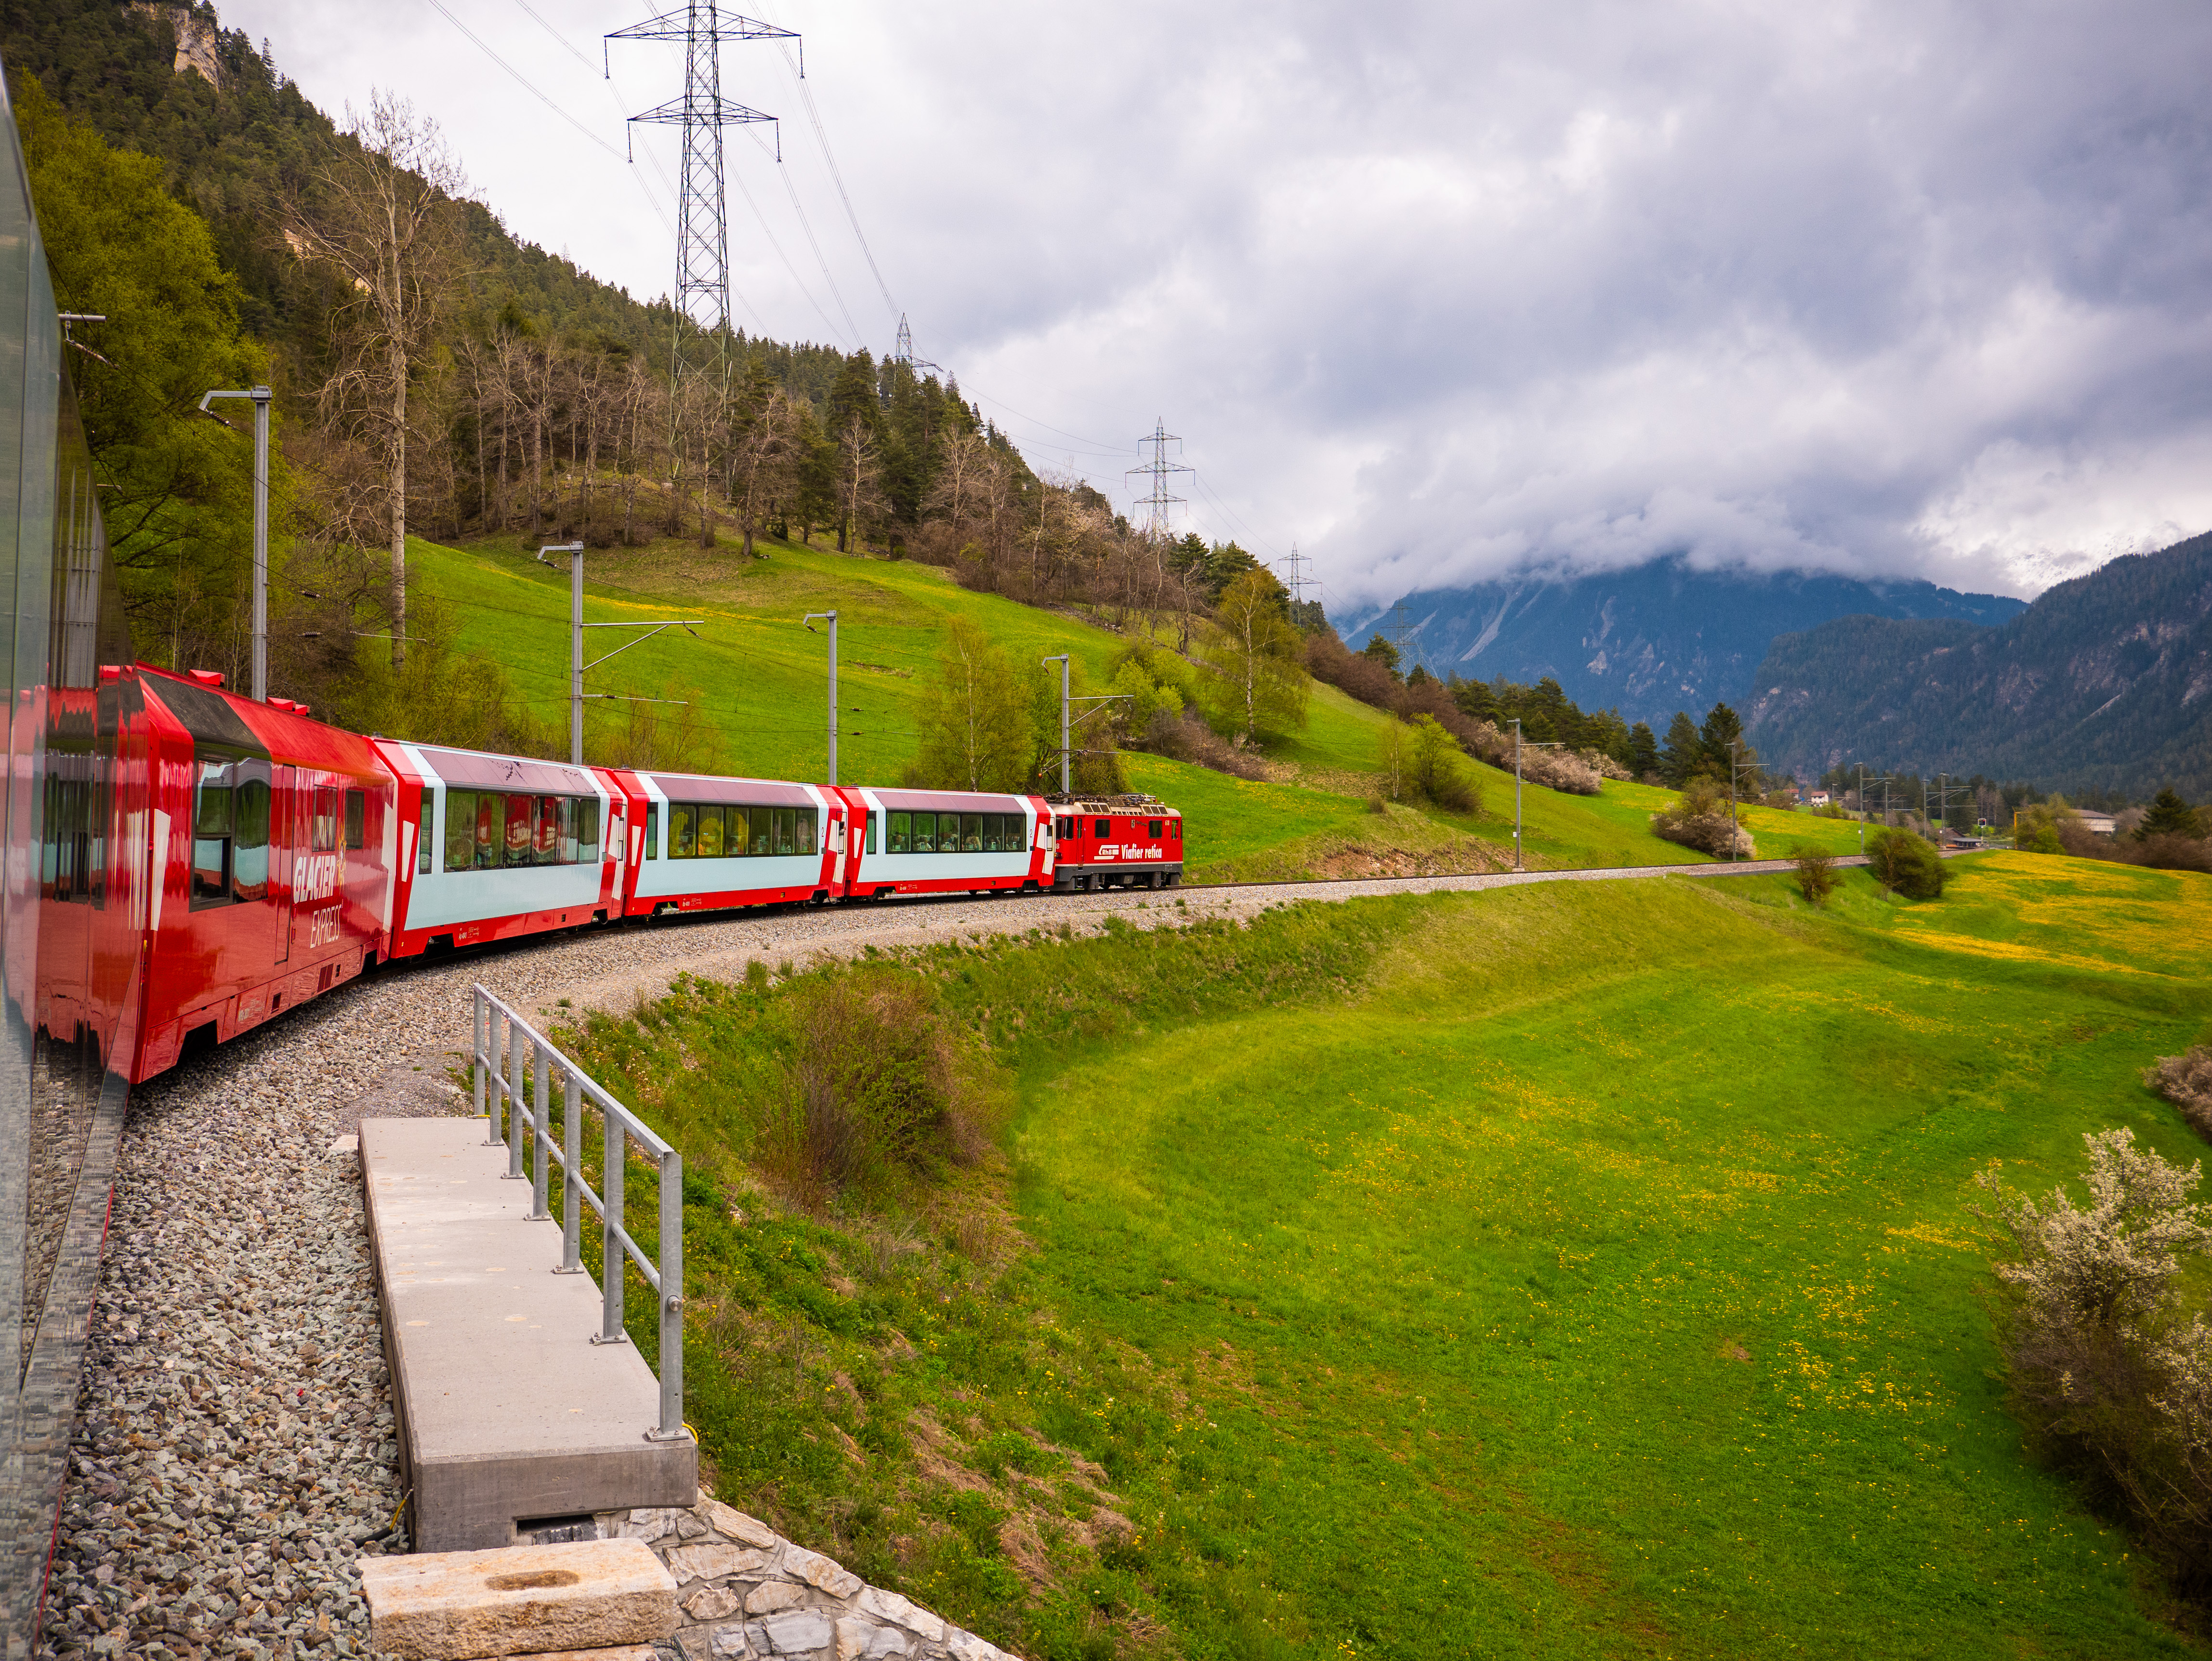 Glacier Express panoramic train In Switzerland travels through the Swiss countryside